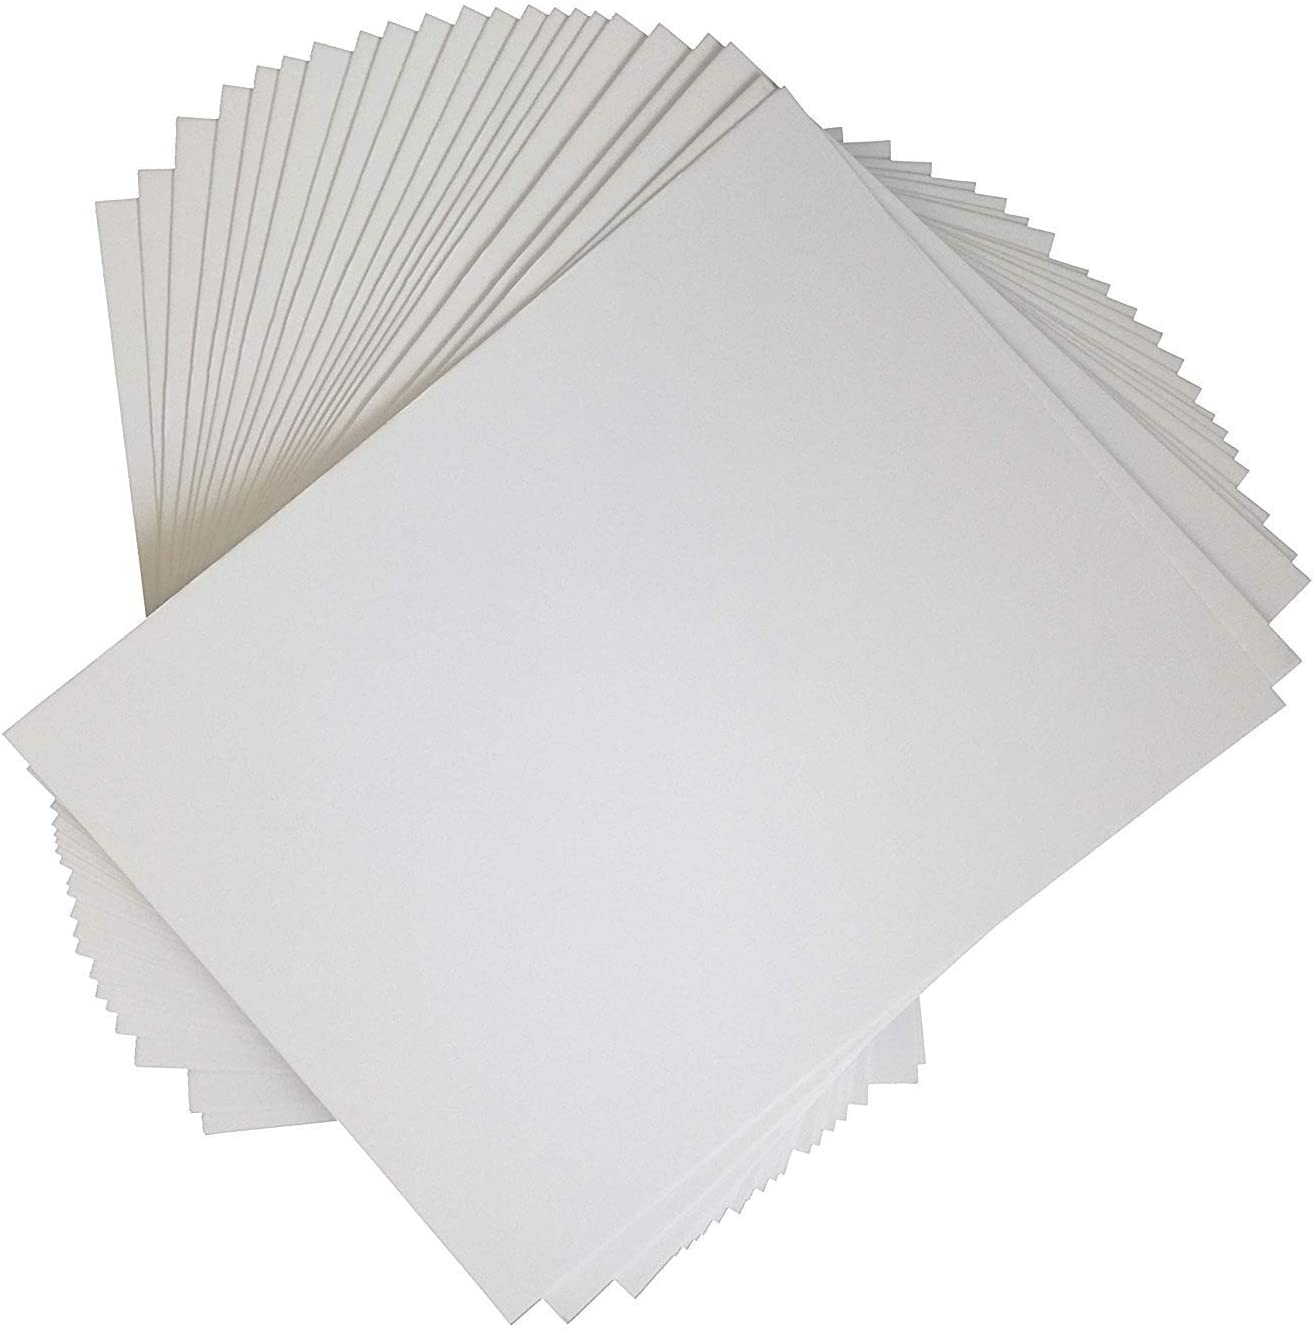 25-Pack 16x20 11x14 8x10 5x7 Black or White Picture Mats for